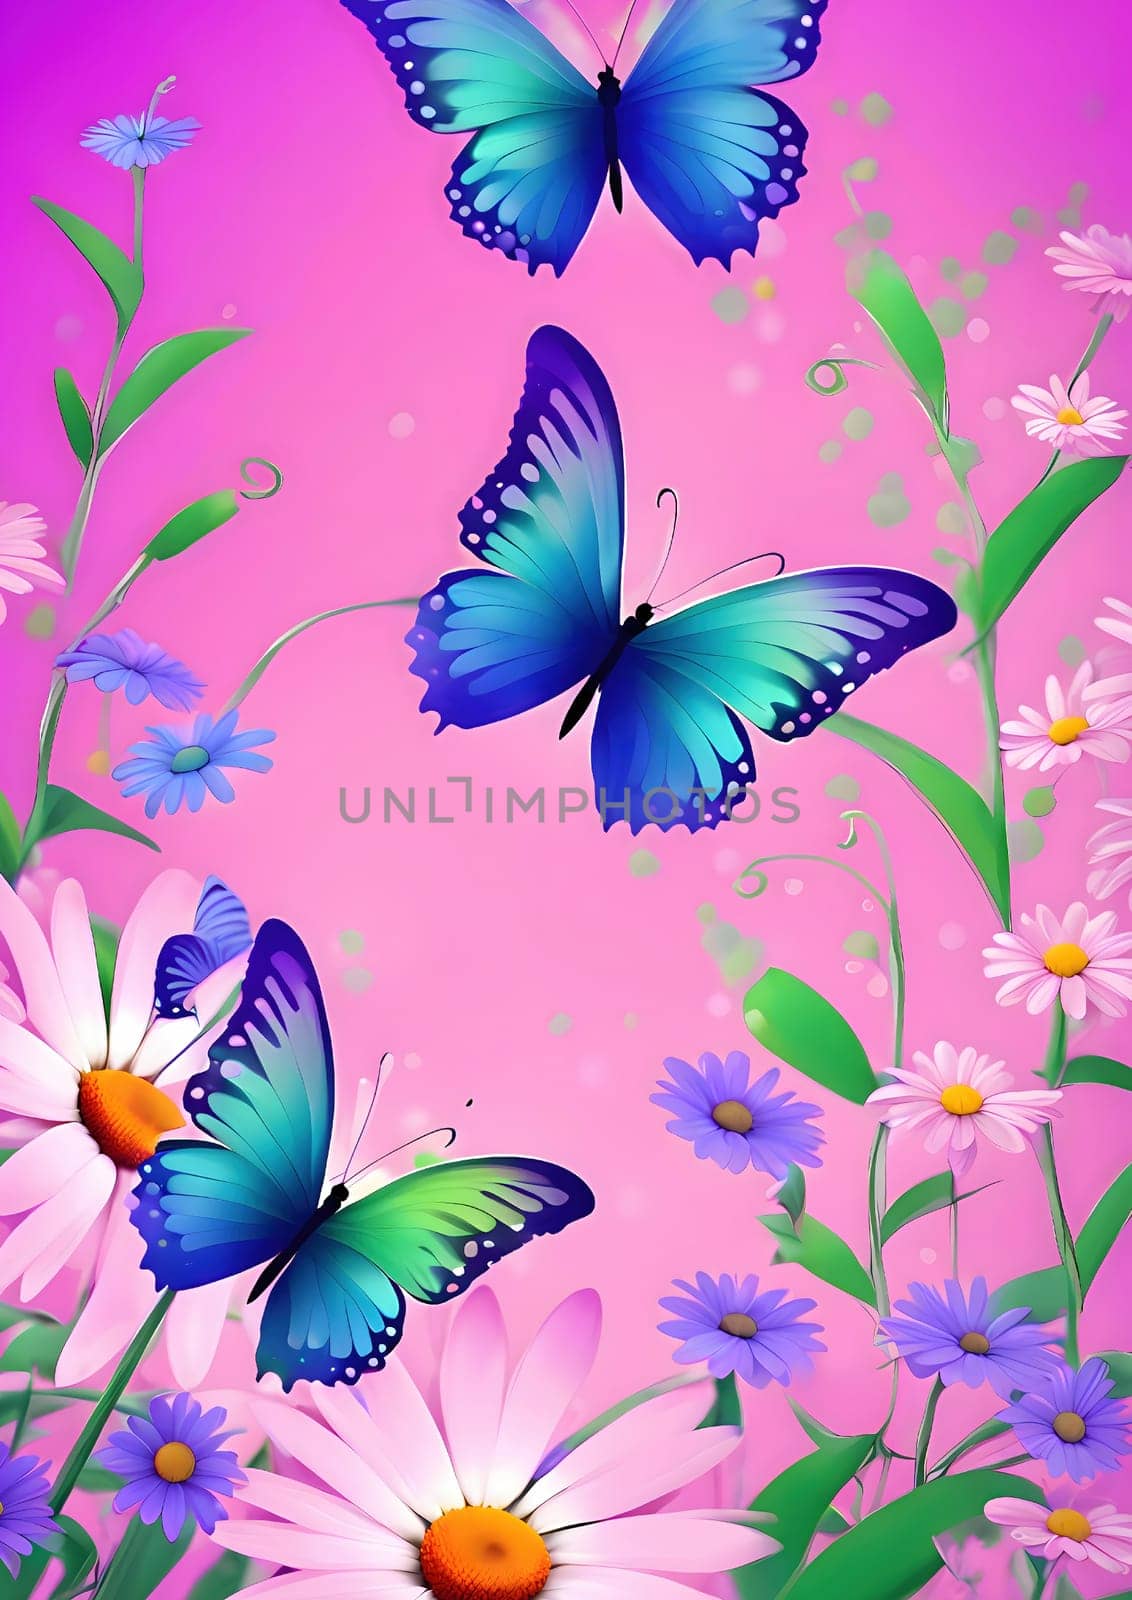 butterflies and flowers flying around pink background, daysies, purple and blue and green colors, beautiful , daisy, very beautiful illustration by rostik924